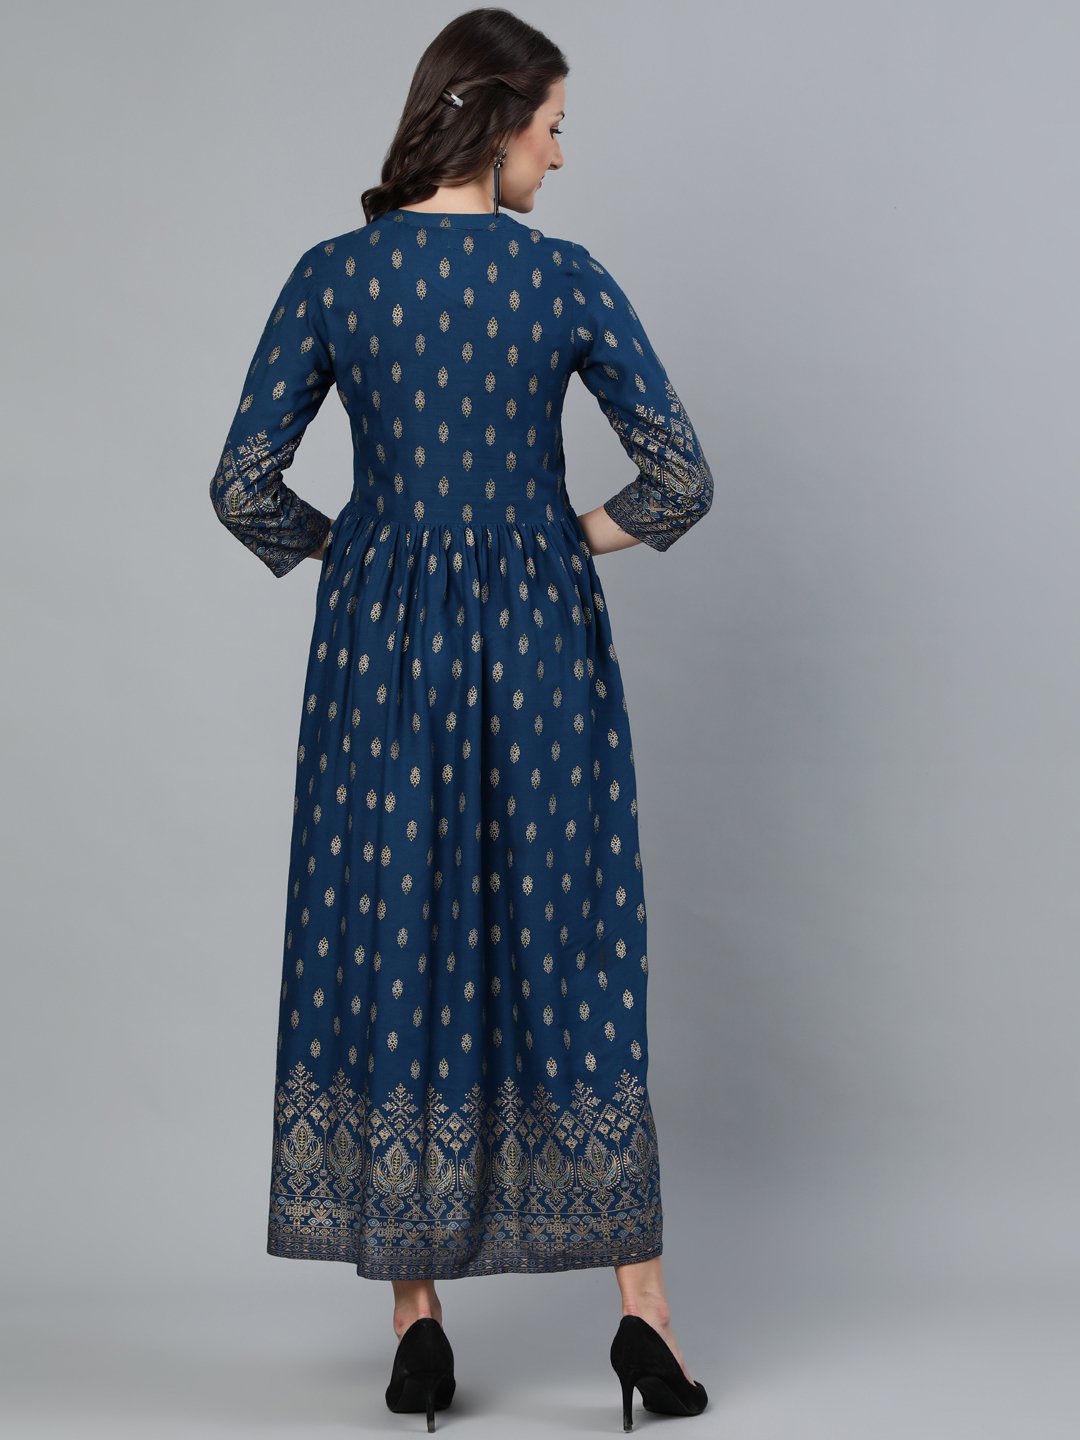 Women's Teal Blue Printed Maxi Dress With Three Quarter Sleeves - Nayo Clothing